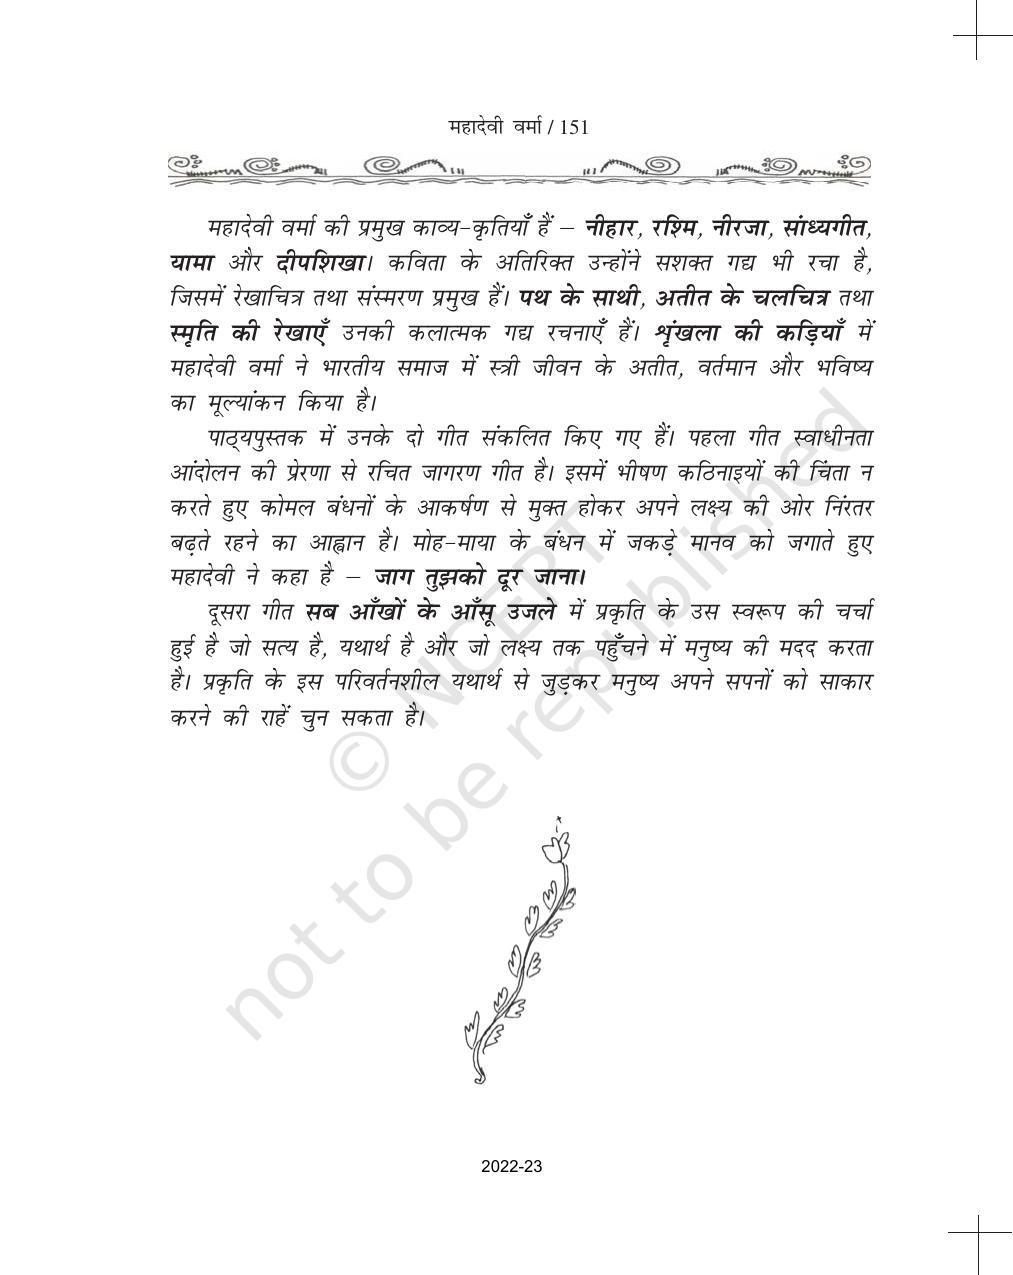 NCERT Book for Class 11 Hindi Antra Chapter 15 महादेवी वर्मा - Page 2